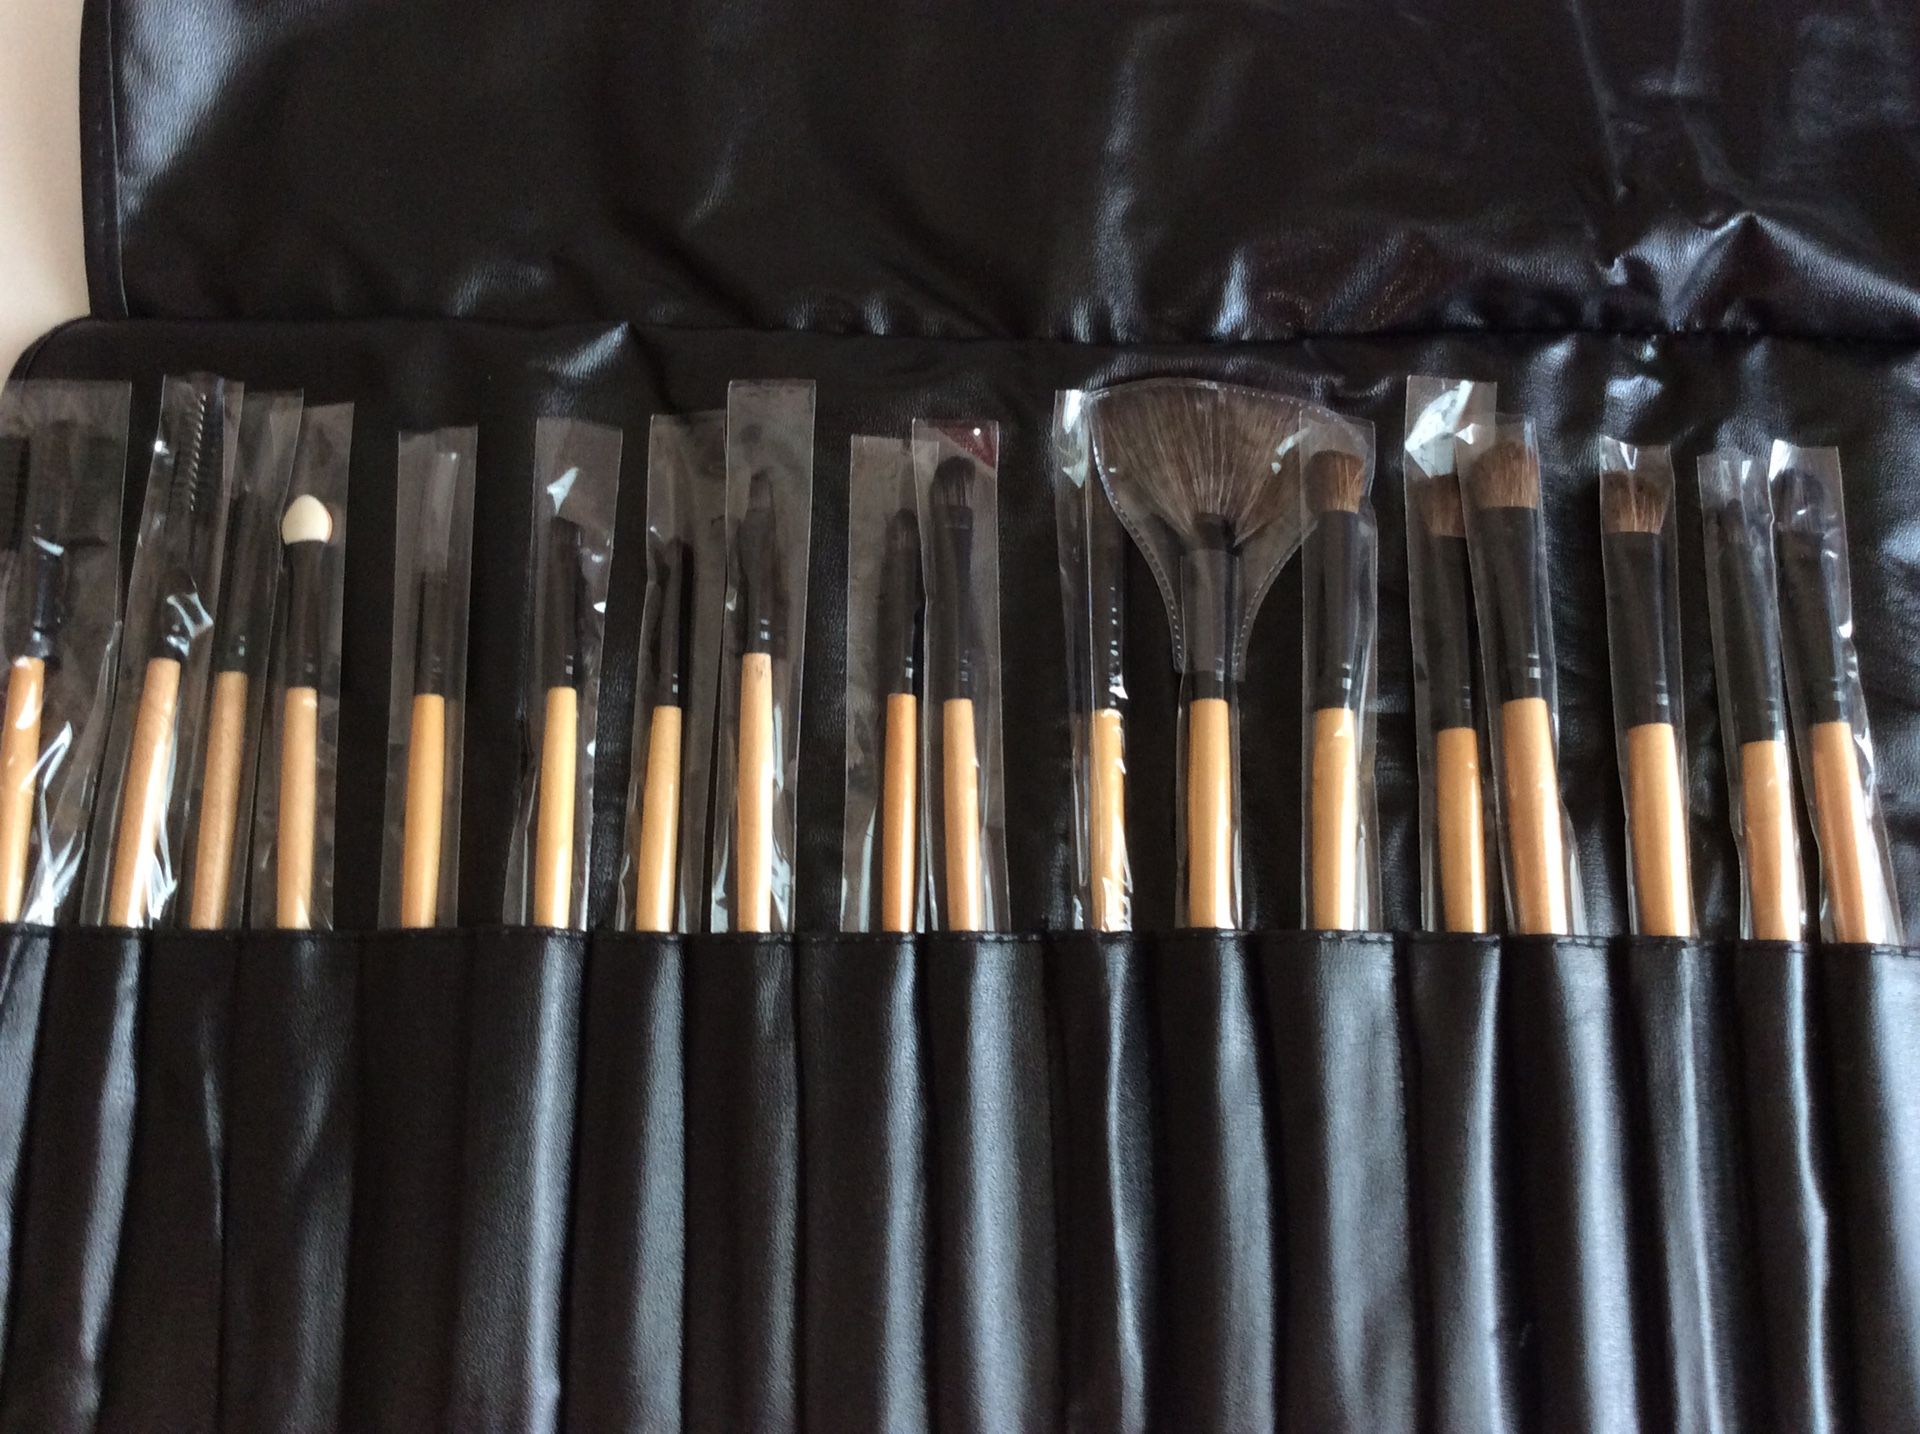 Professional Natural Makeup Brushes-24 Brushes in Black (Brand New)